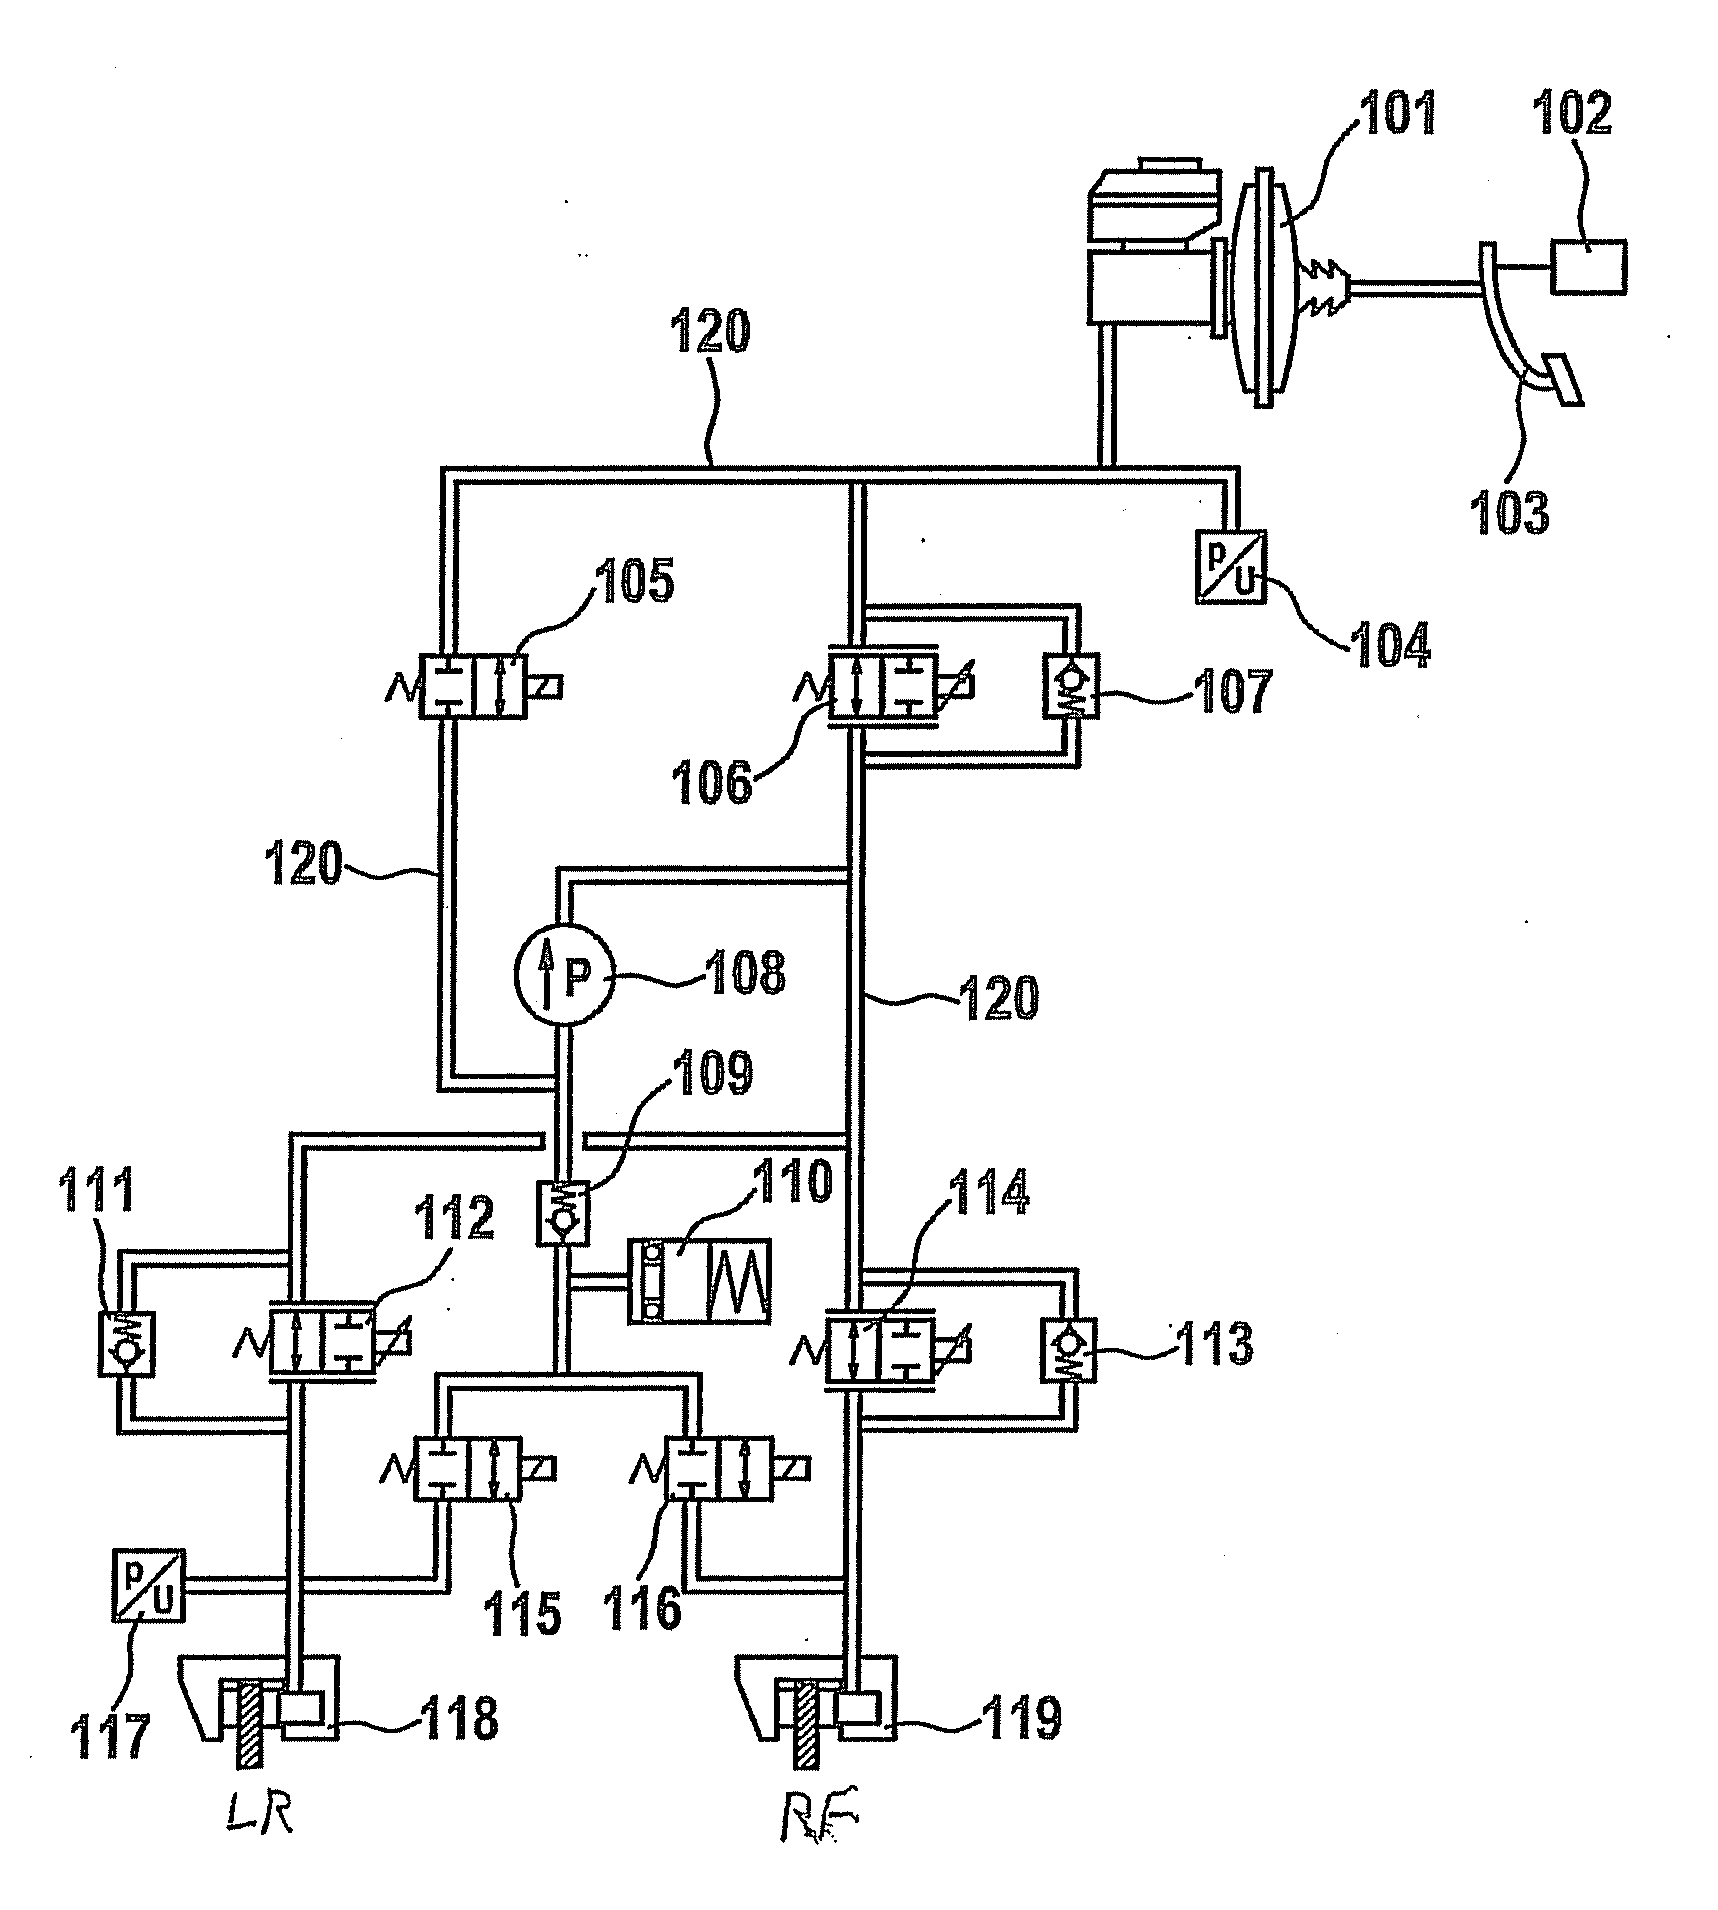 Method and device for determining and balancing the working point of valves in a hydraulic system